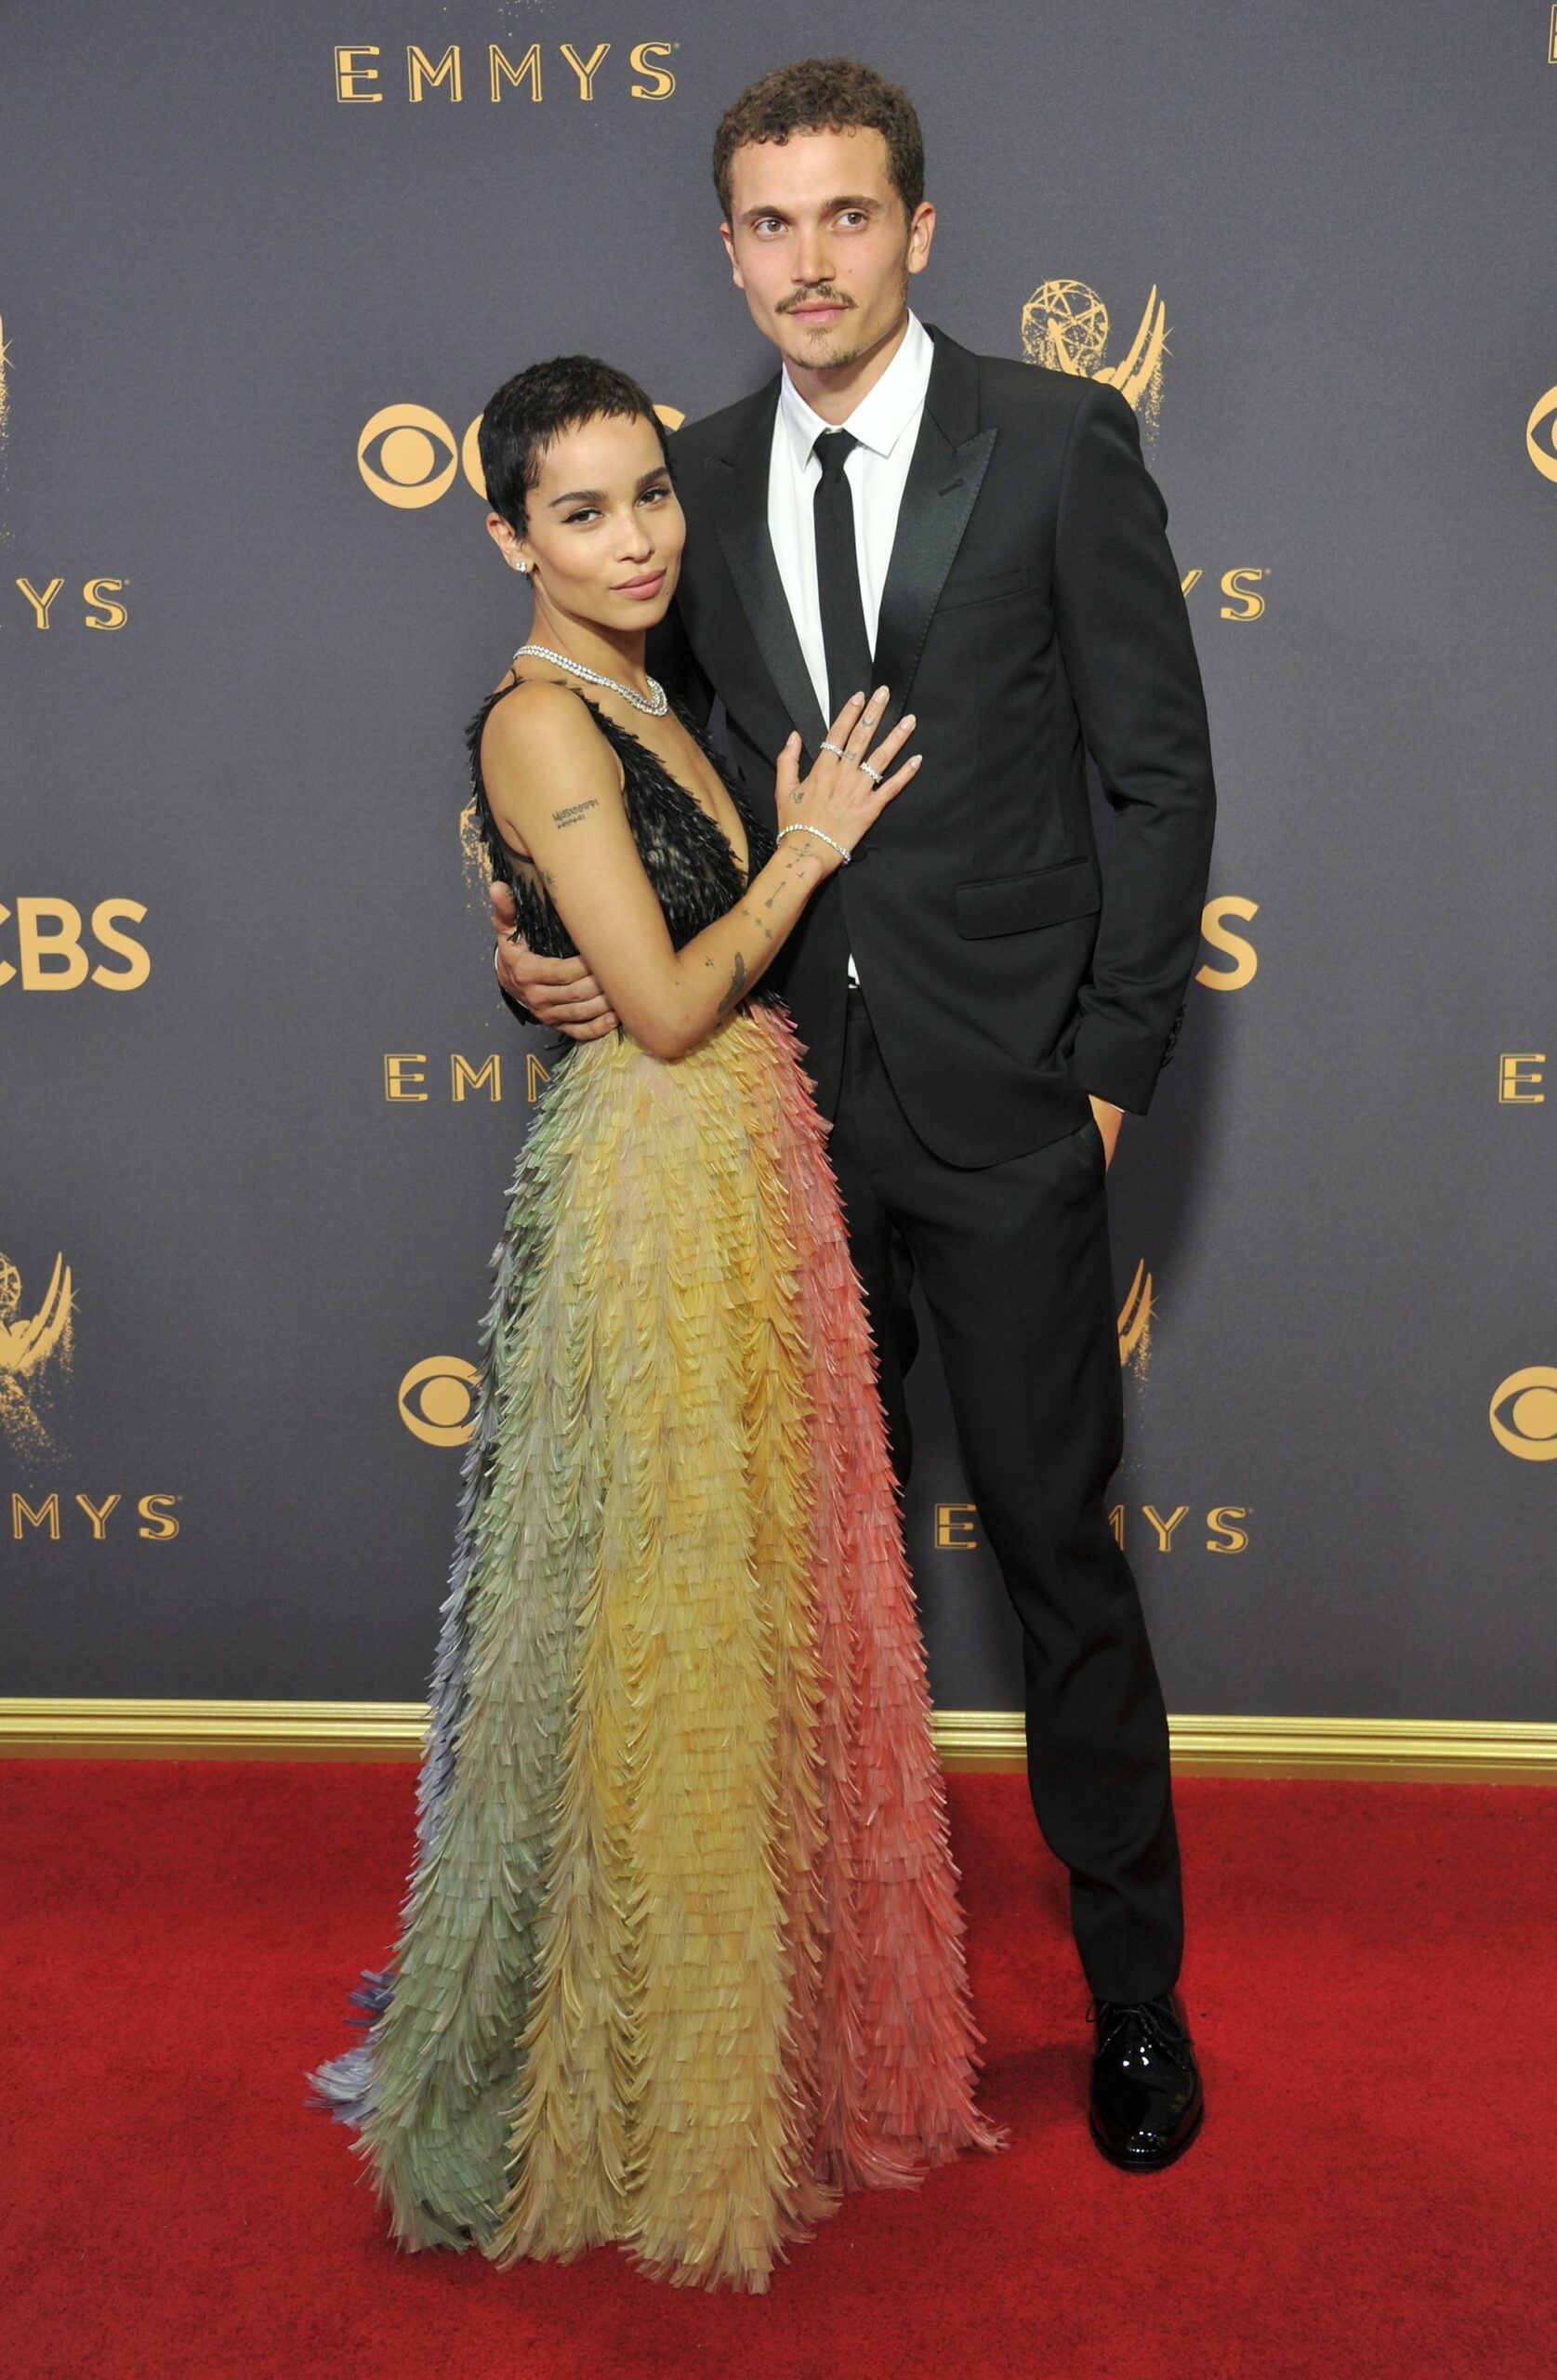 LOS ANGELES, CA - SEPTEMBER 17:  Zoe Kravitz and Karl Glusman arrive at the 69th Annual Primetime Emmy Awards at Microsoft Theater on September 17, 2017 in Los Angeles, California.  (Photo by Gregg DeGuire/Getty Images)